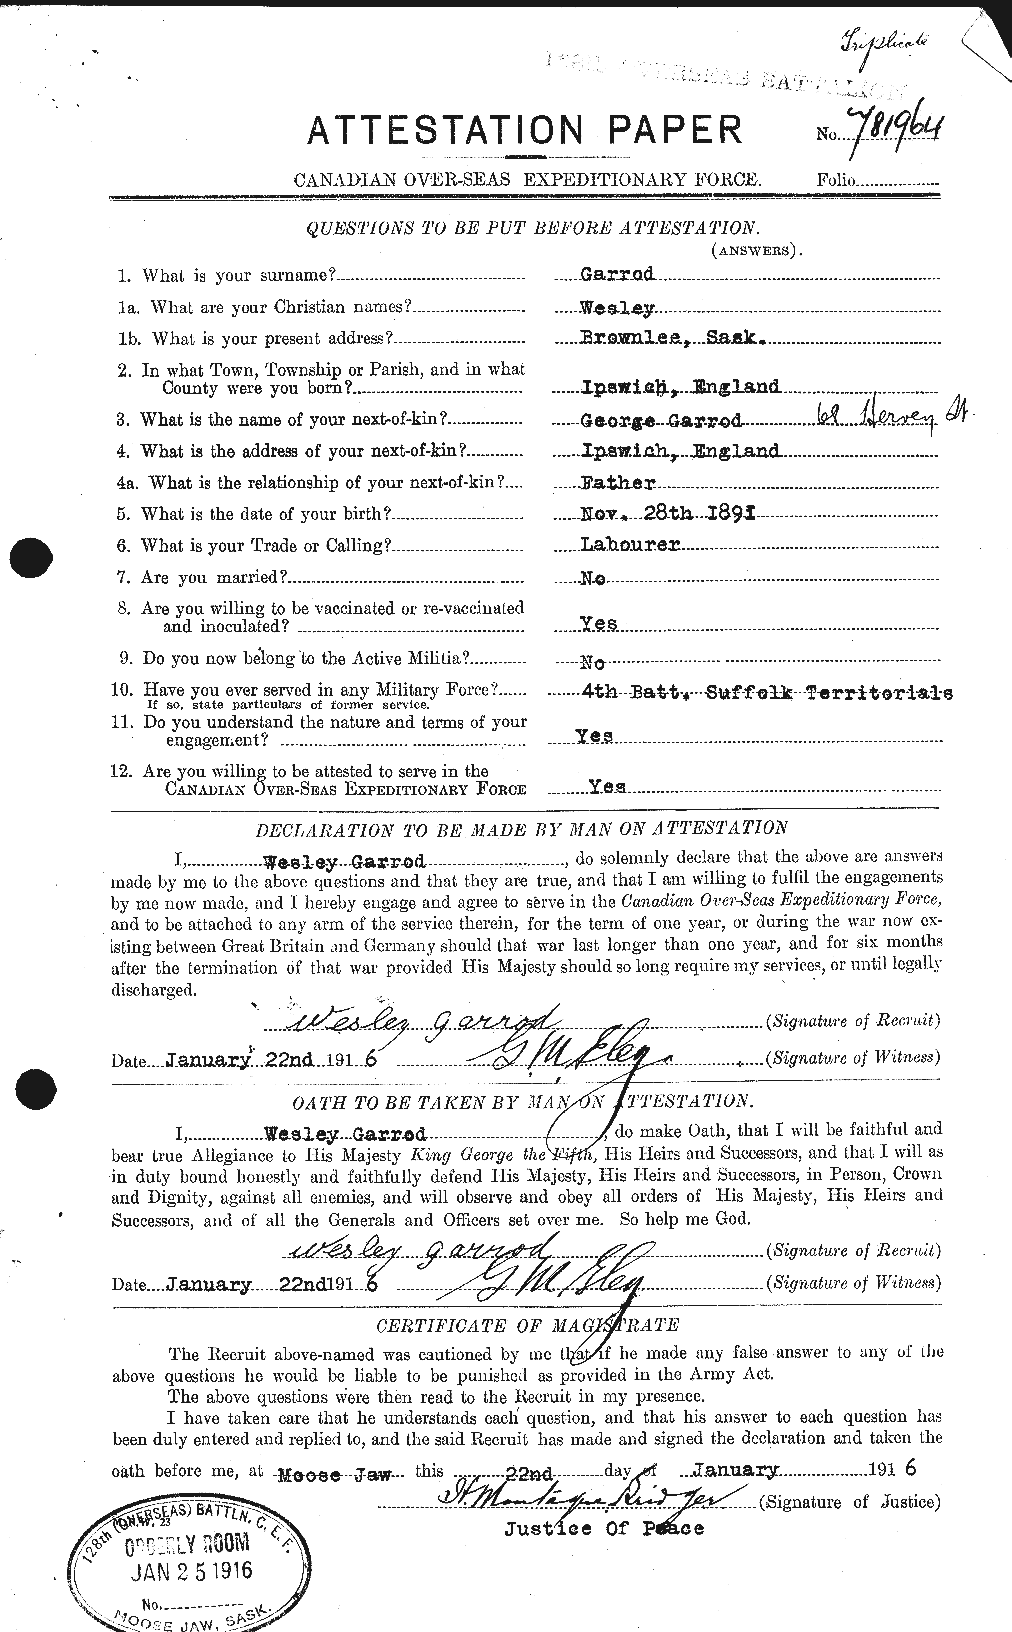 Personnel Records of the First World War - CEF 343455a